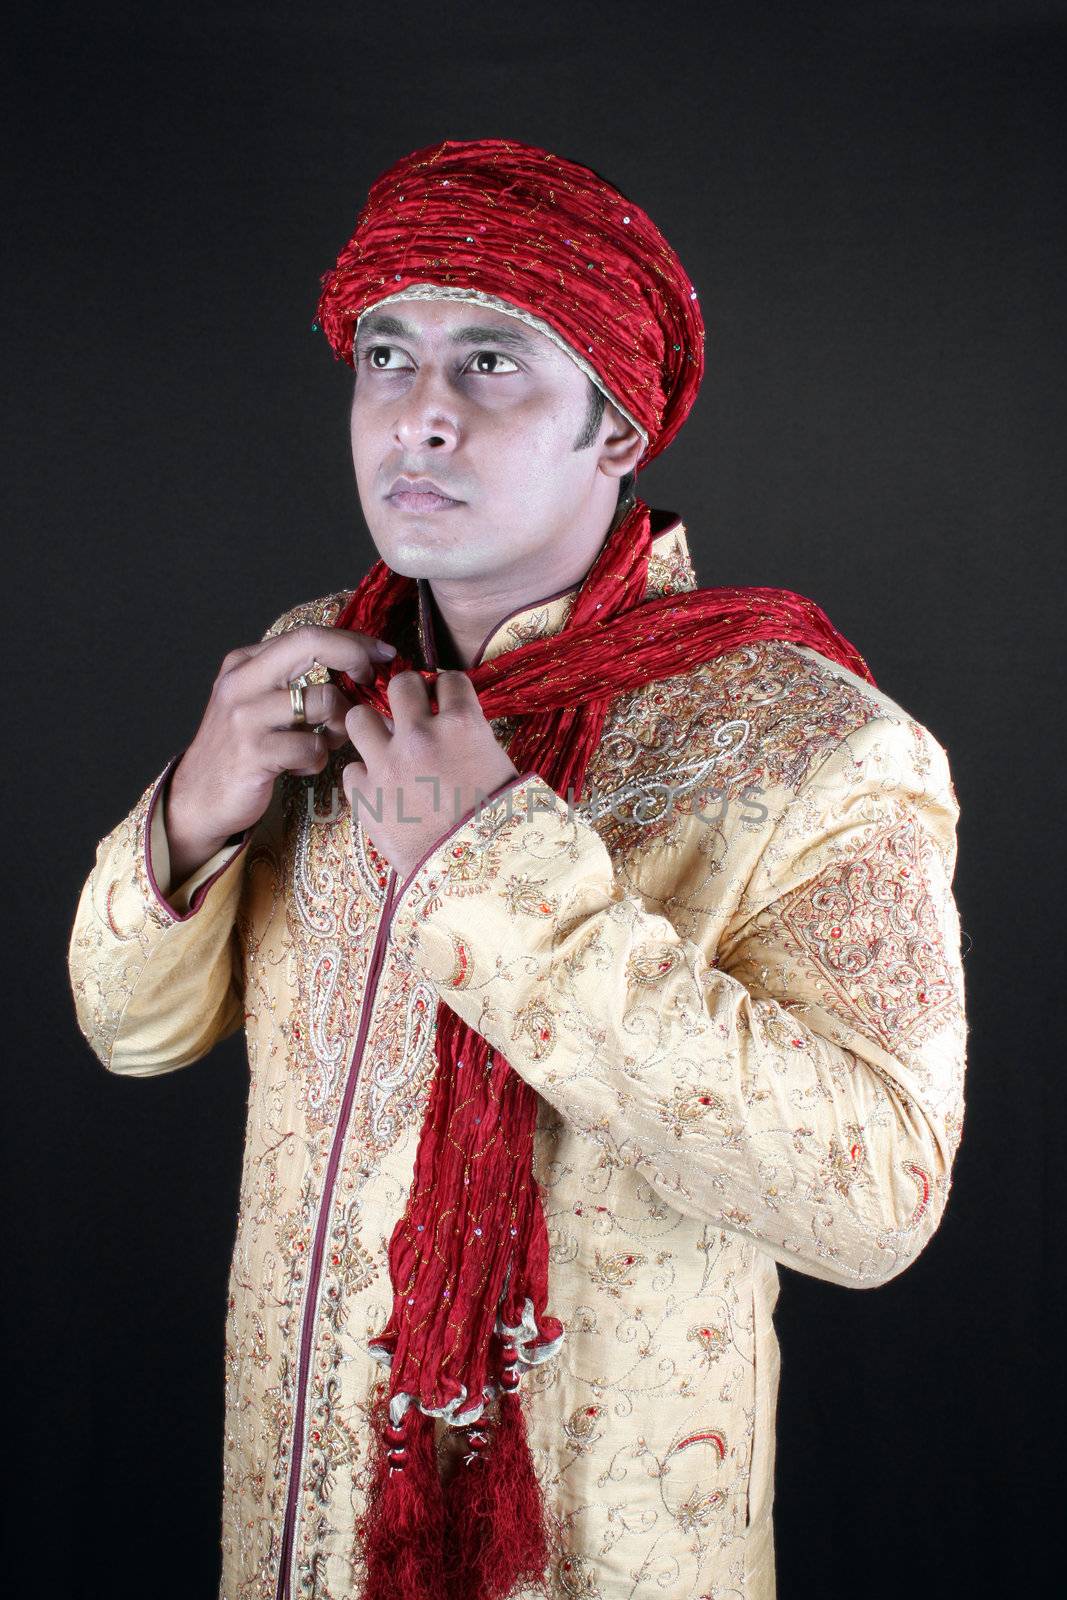 A young Indian guy wearing a traditional royal costume.